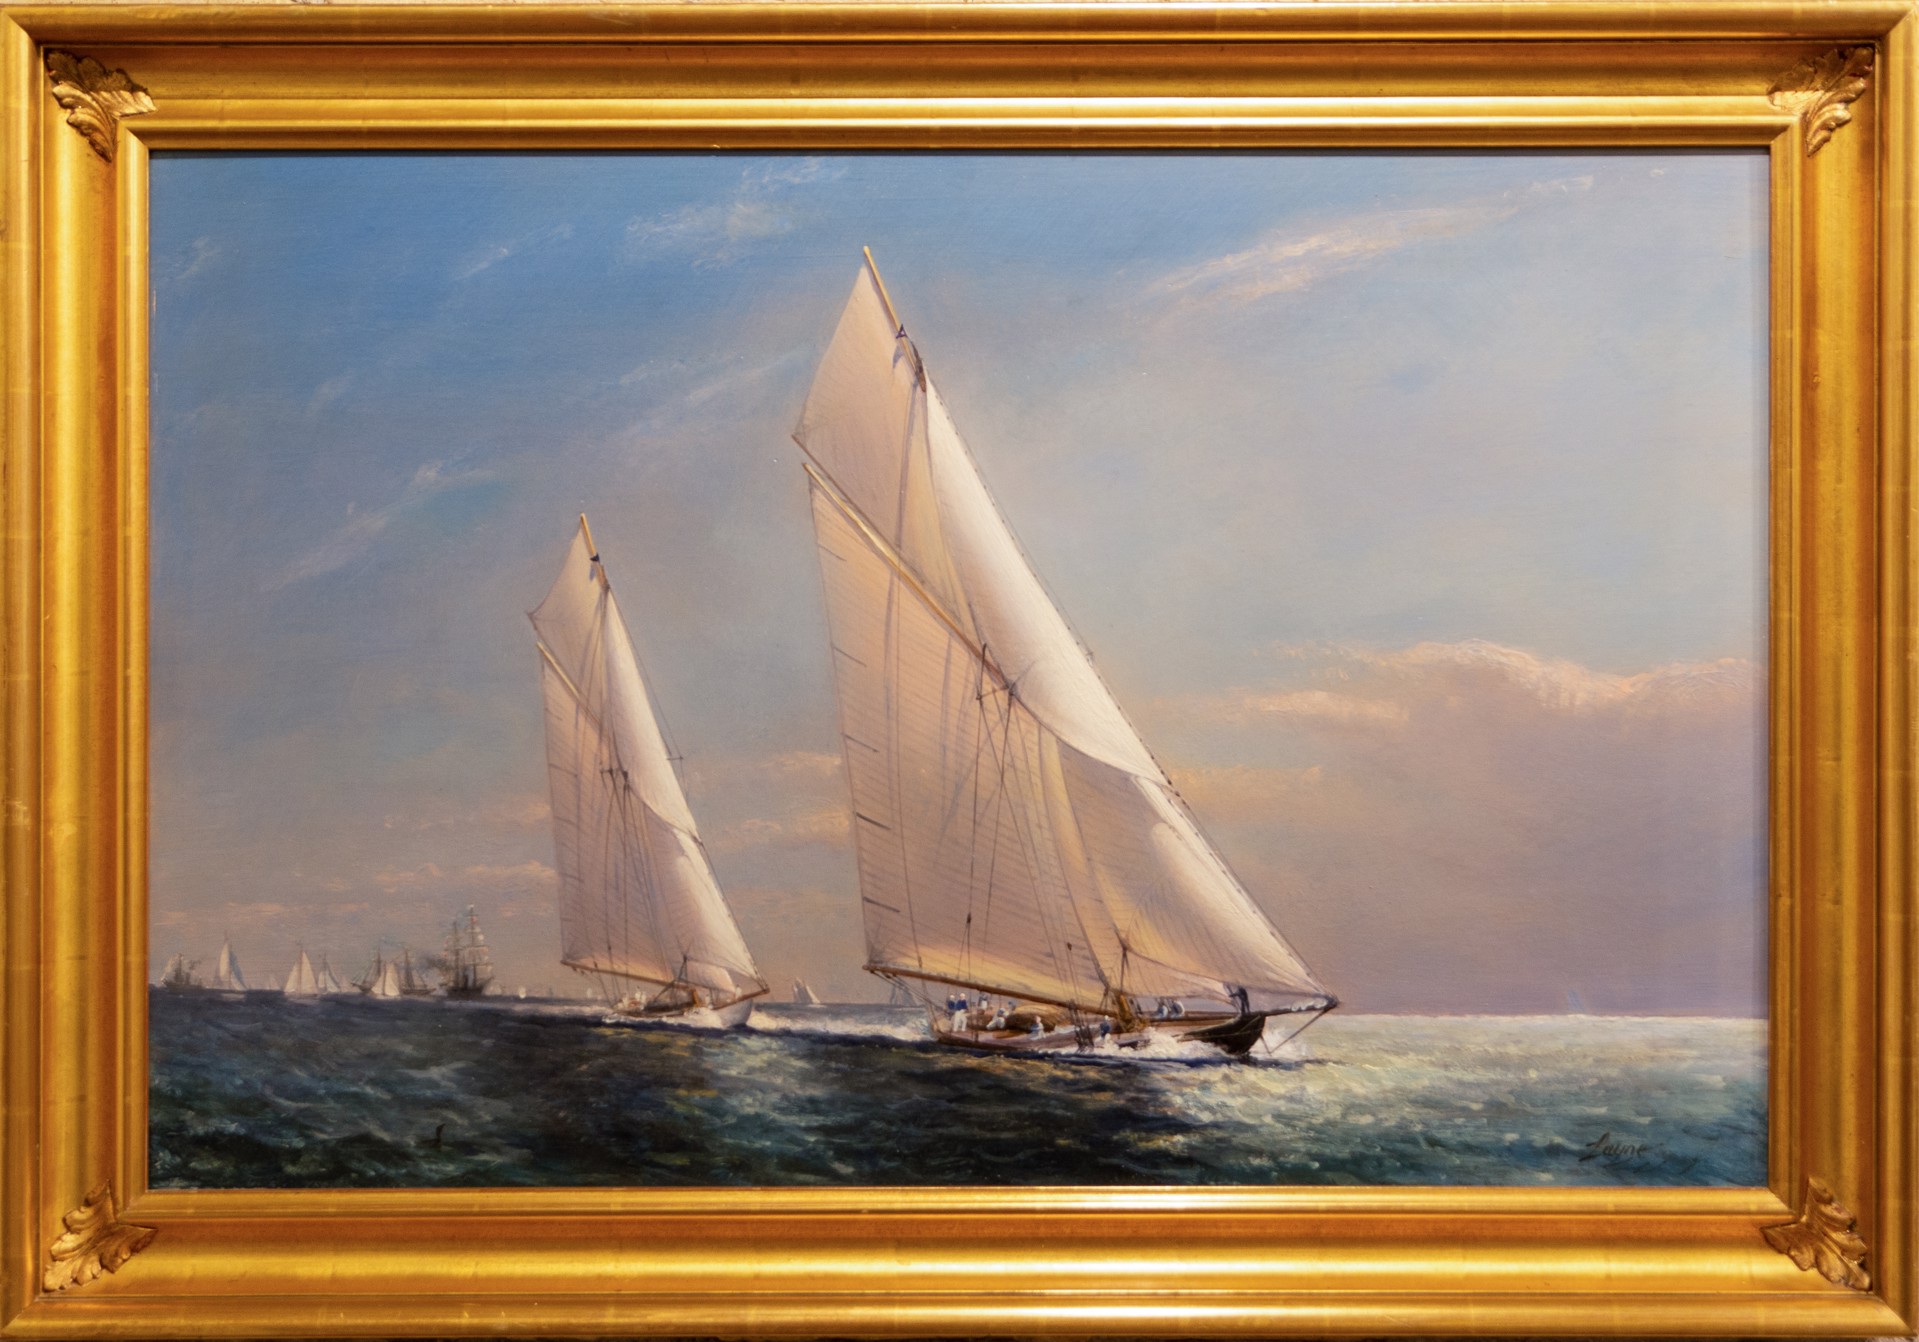 America's Cup by Peter Layne Arguimbau